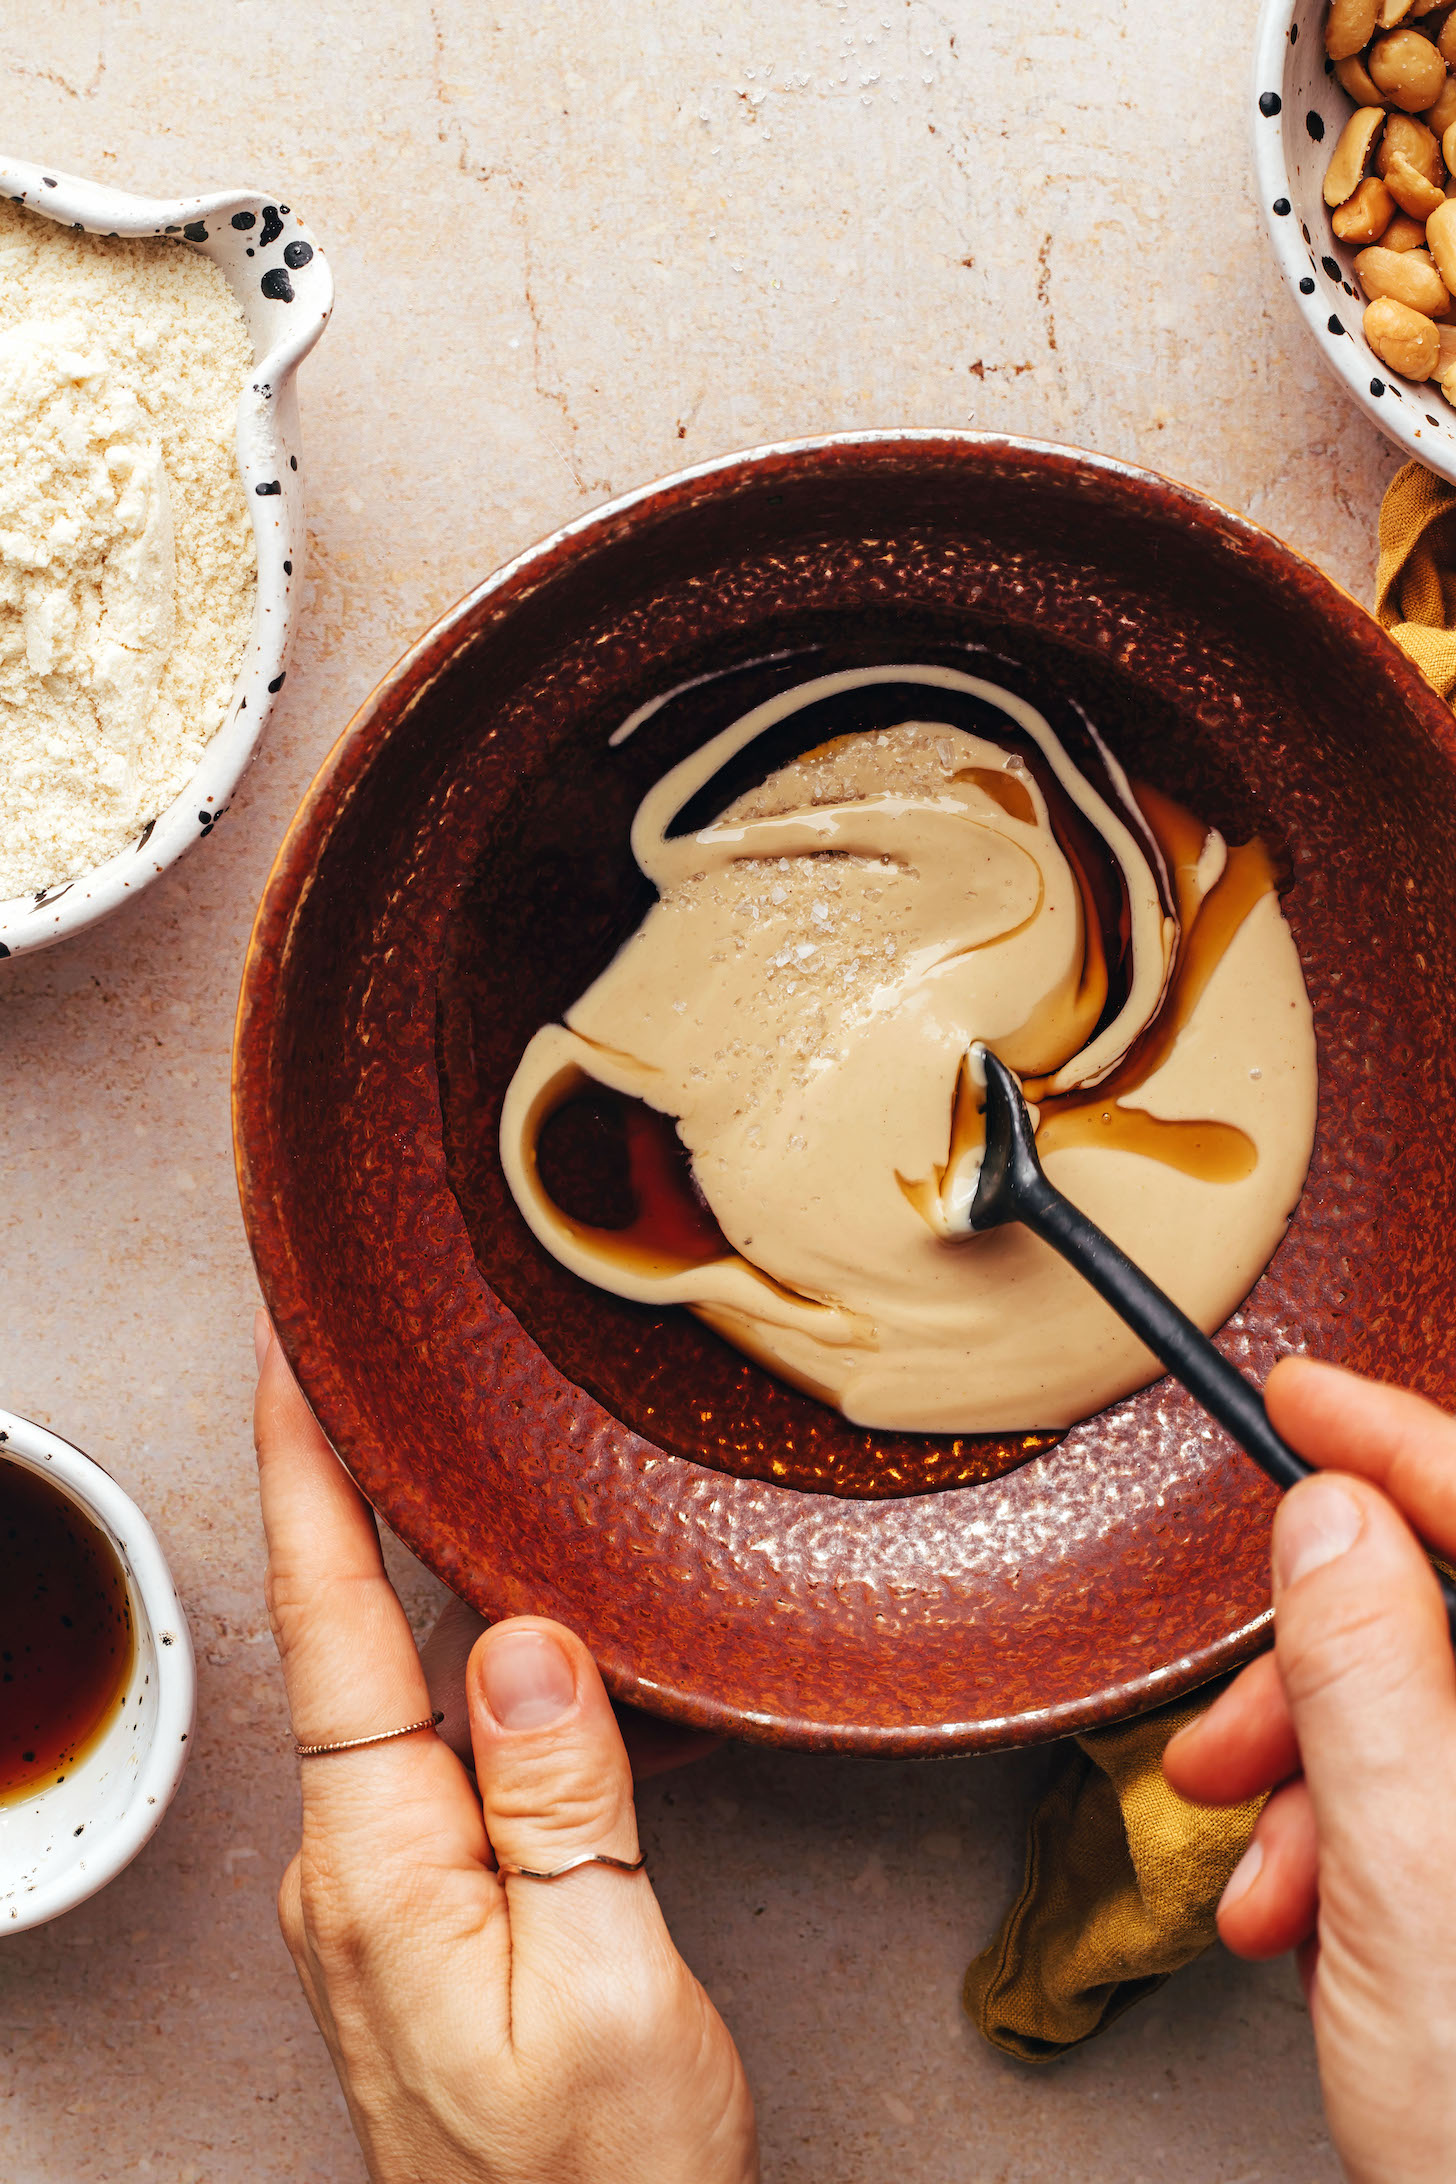 Stirring together cashew butter, maple syrup, salt, and vanilla in a small bowl